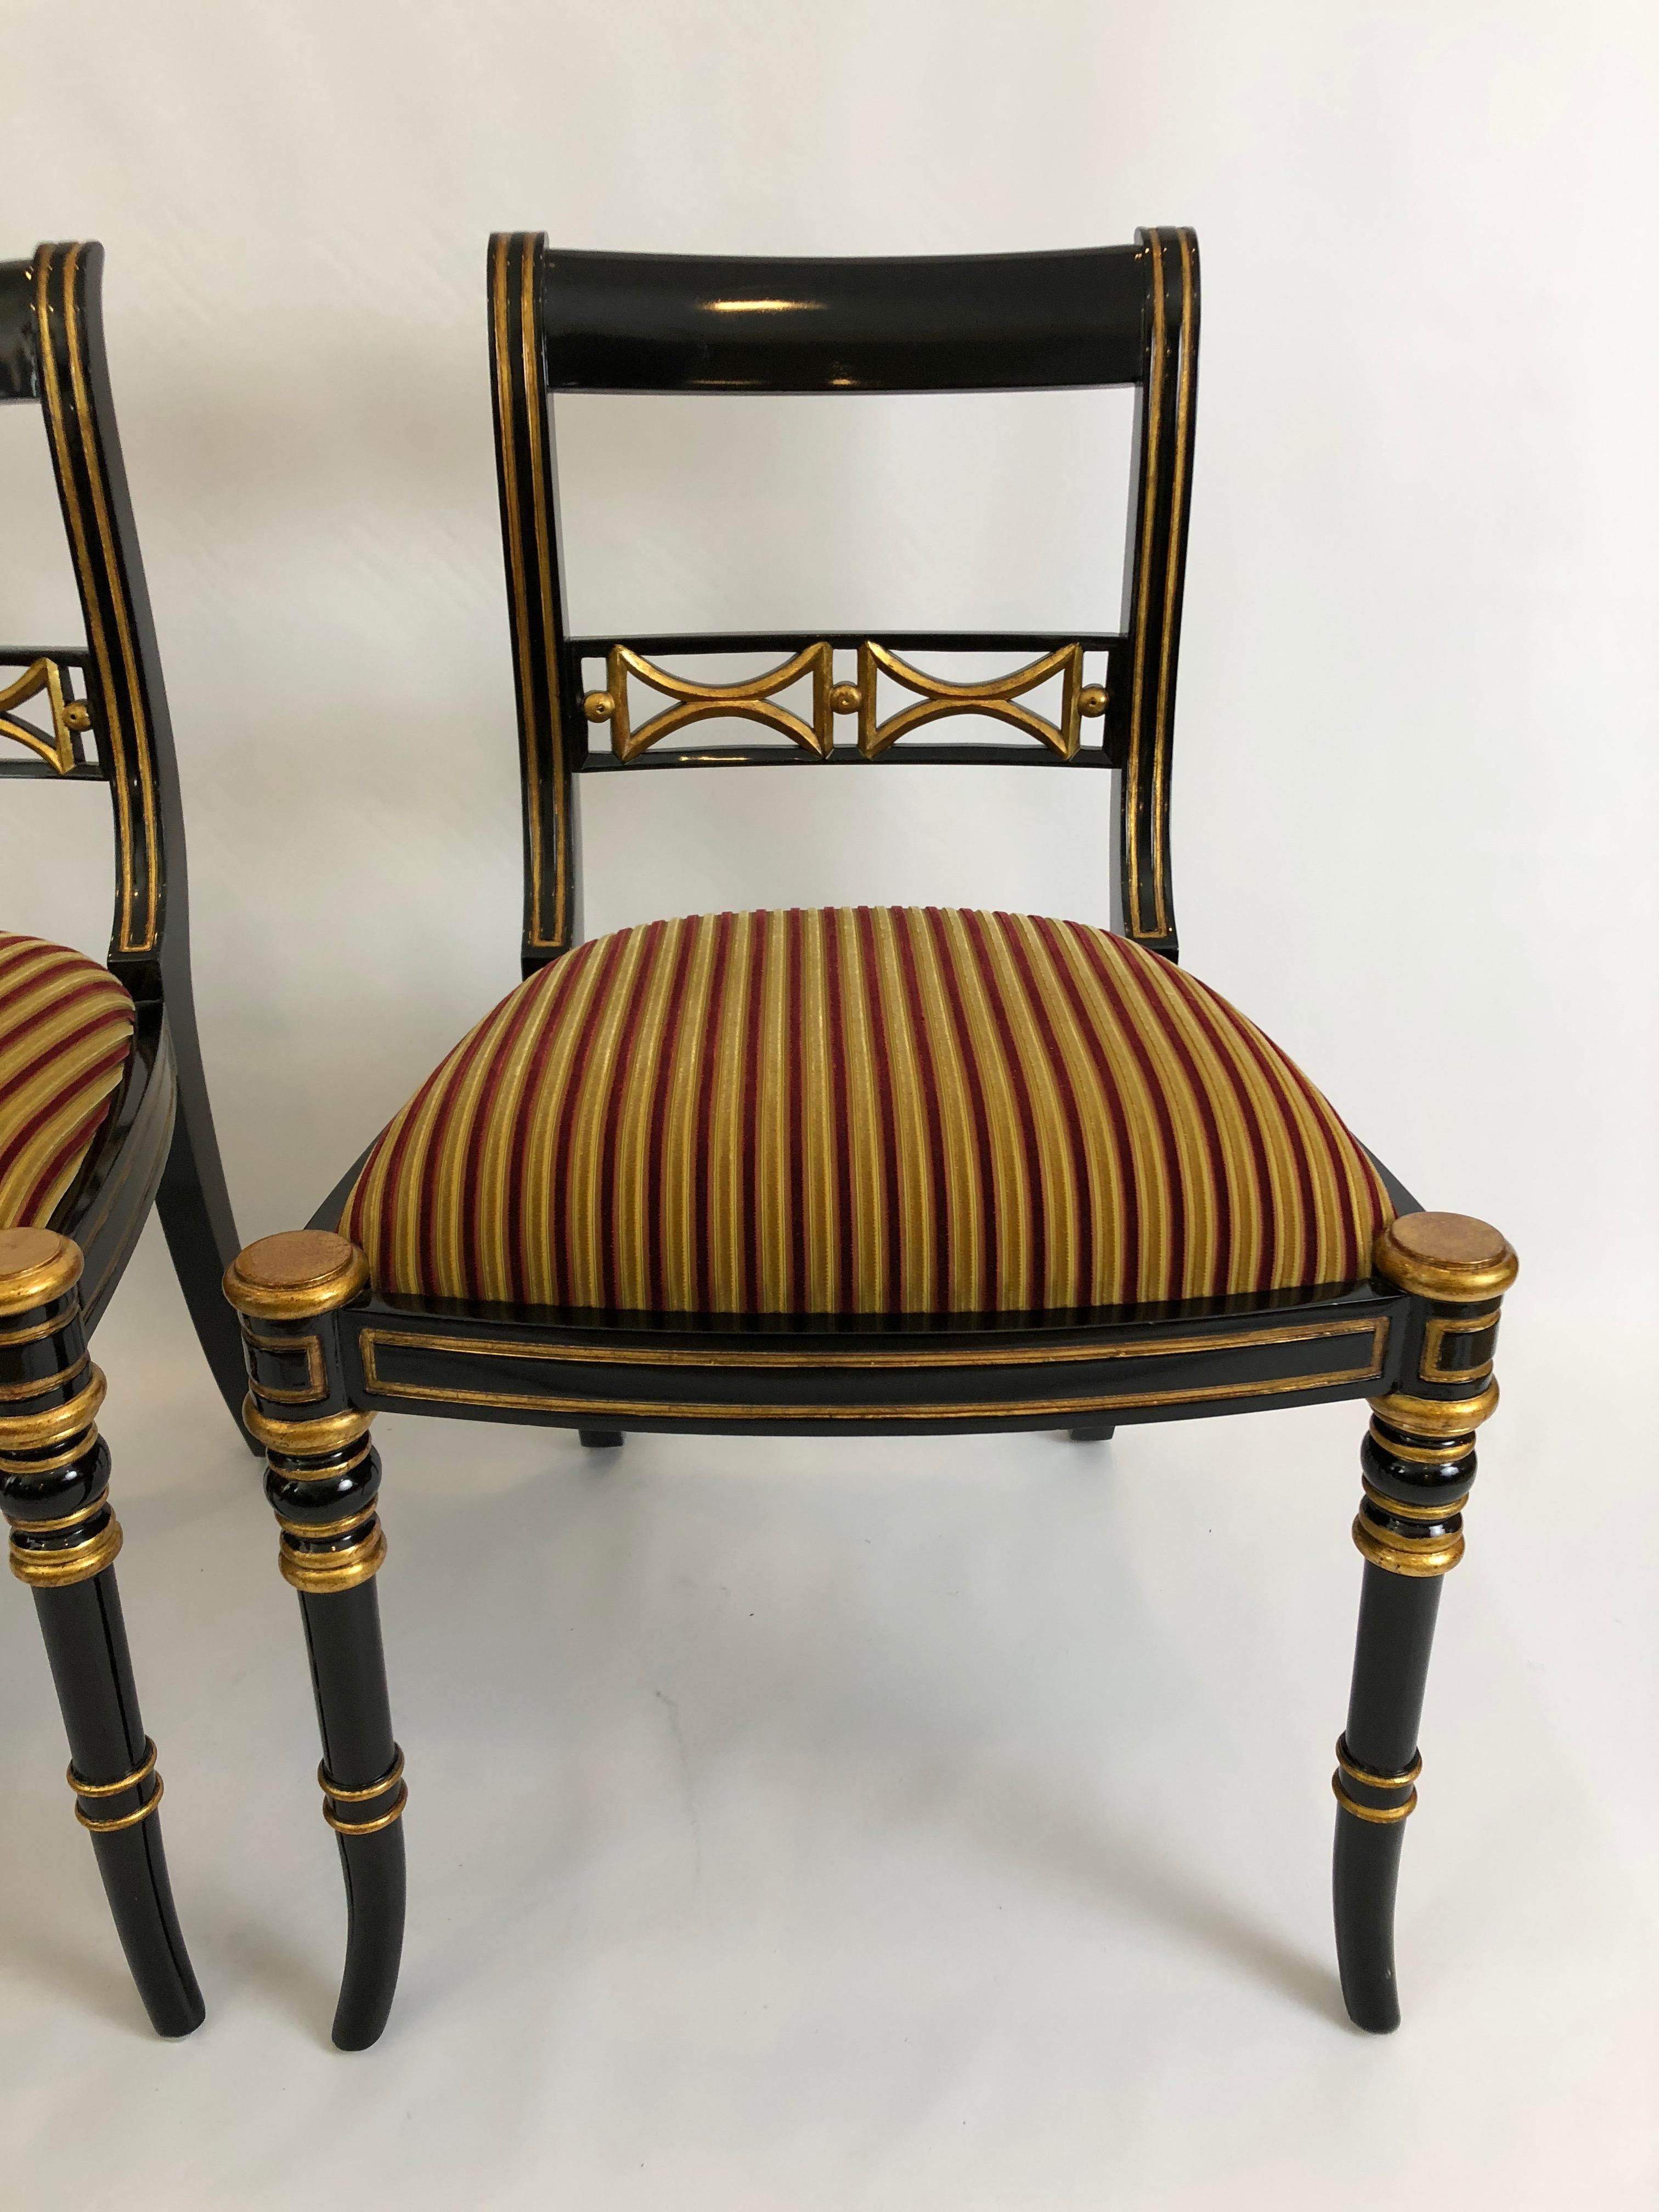 Two very elegant Regency style black and gold side chairs by Maitland Smith, having rich striped velvet seats. Great for a fancy living room or extra dining chairs.
Measures: Seat depth 18.